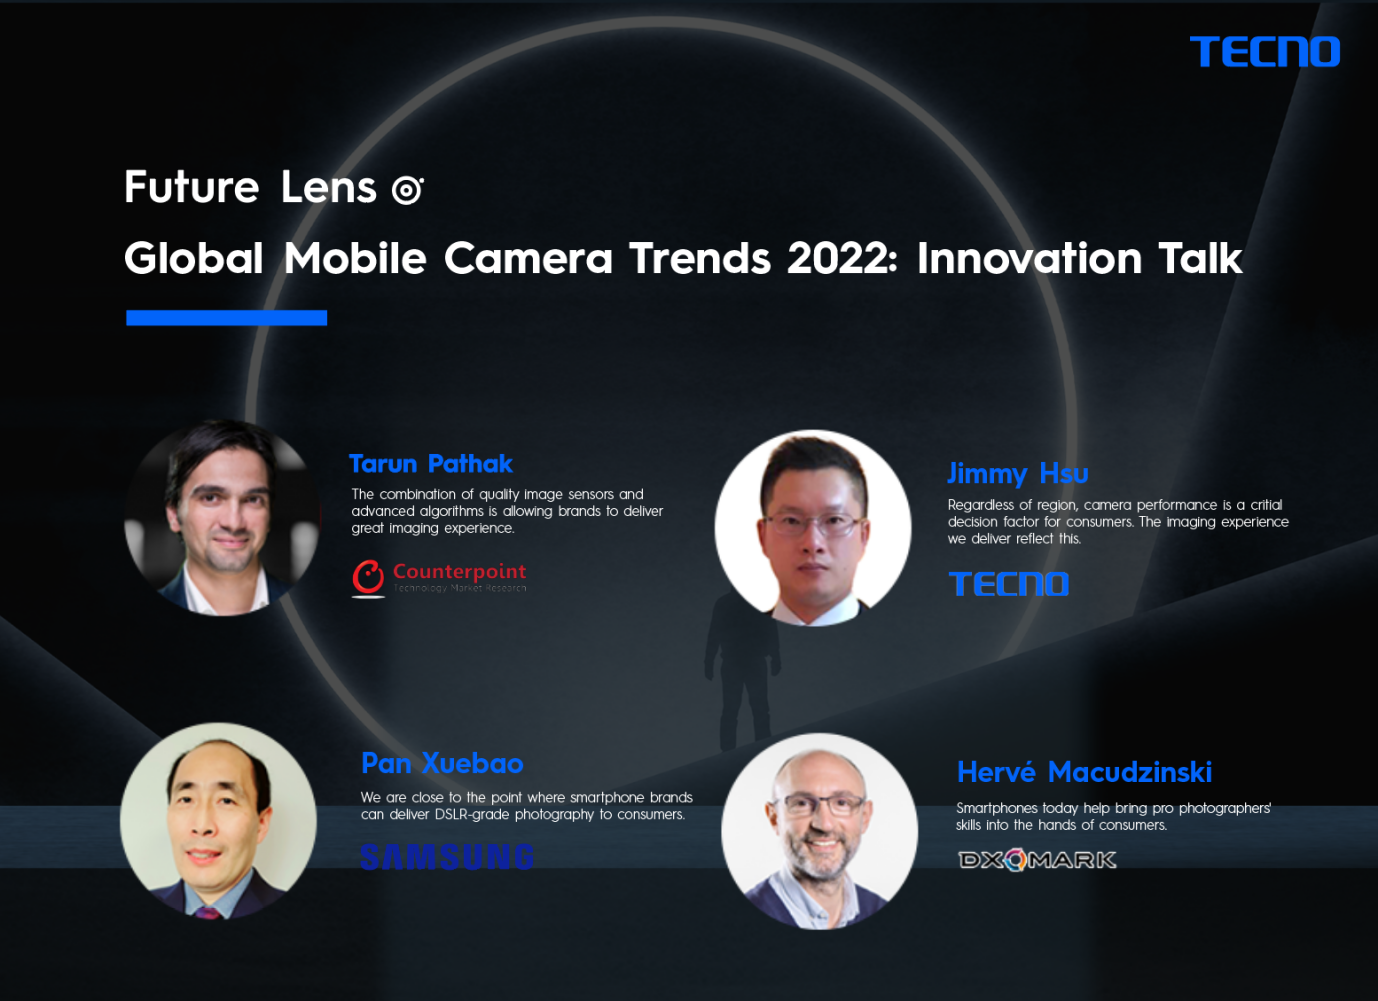 Tecno Mobile Camera Trends 2022 Shared by Four Global Experts